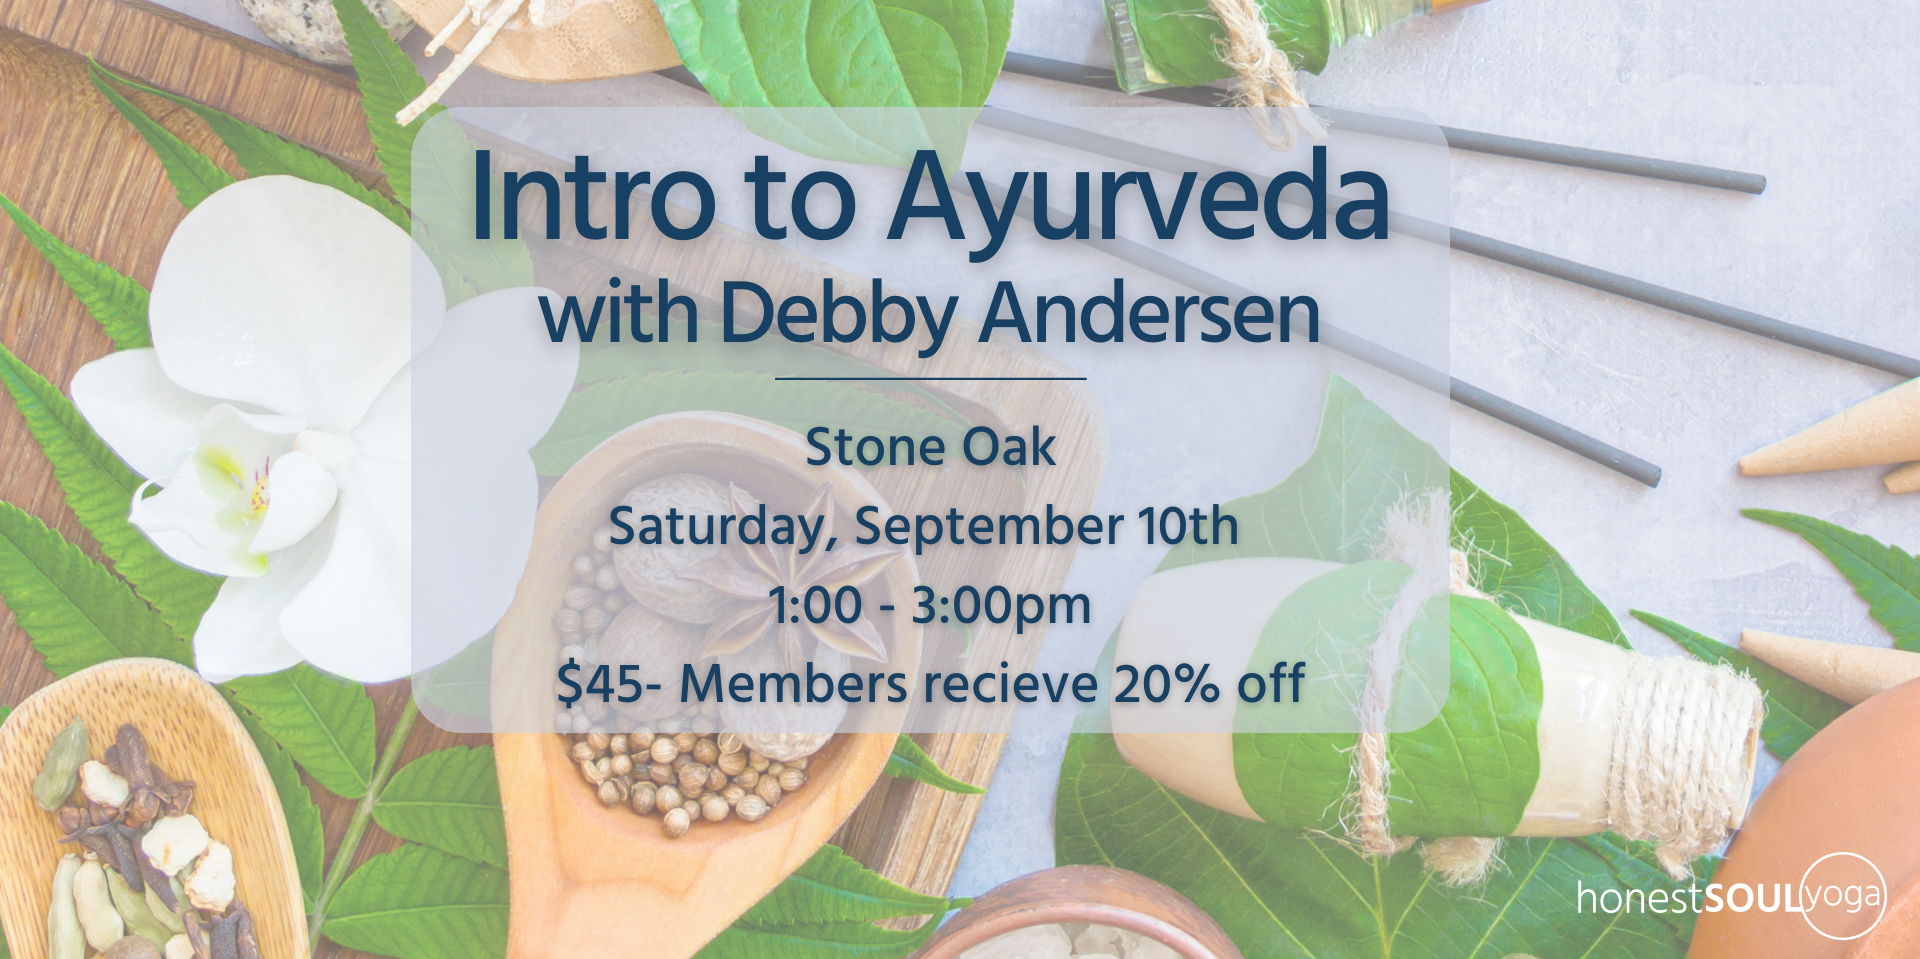 Intro to Ayurveda with Debby Andersen promotional image